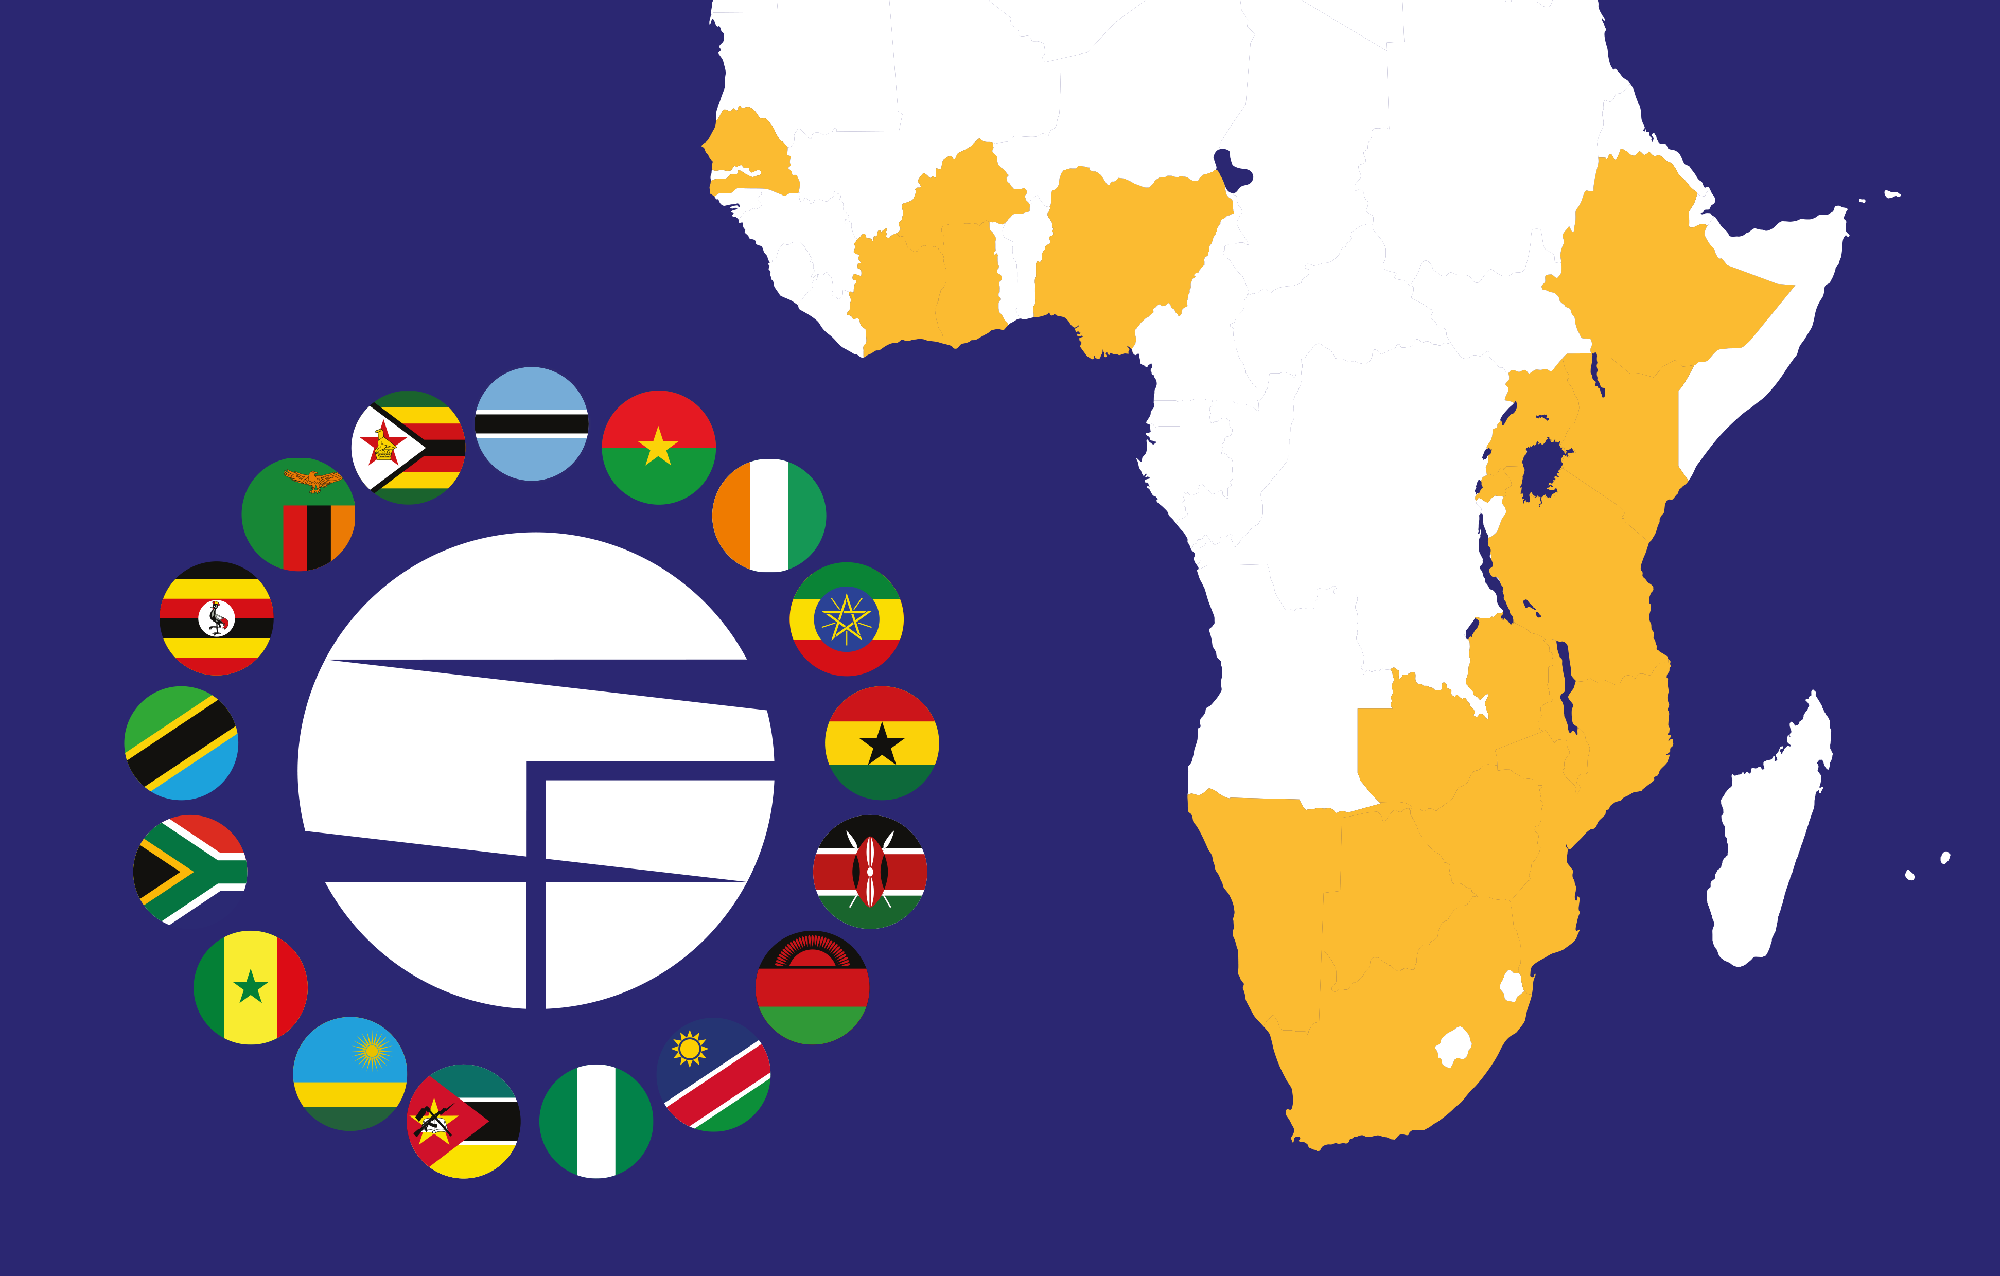 Map of Africa showing regional members and IIASA logo surrounded by relevant flags